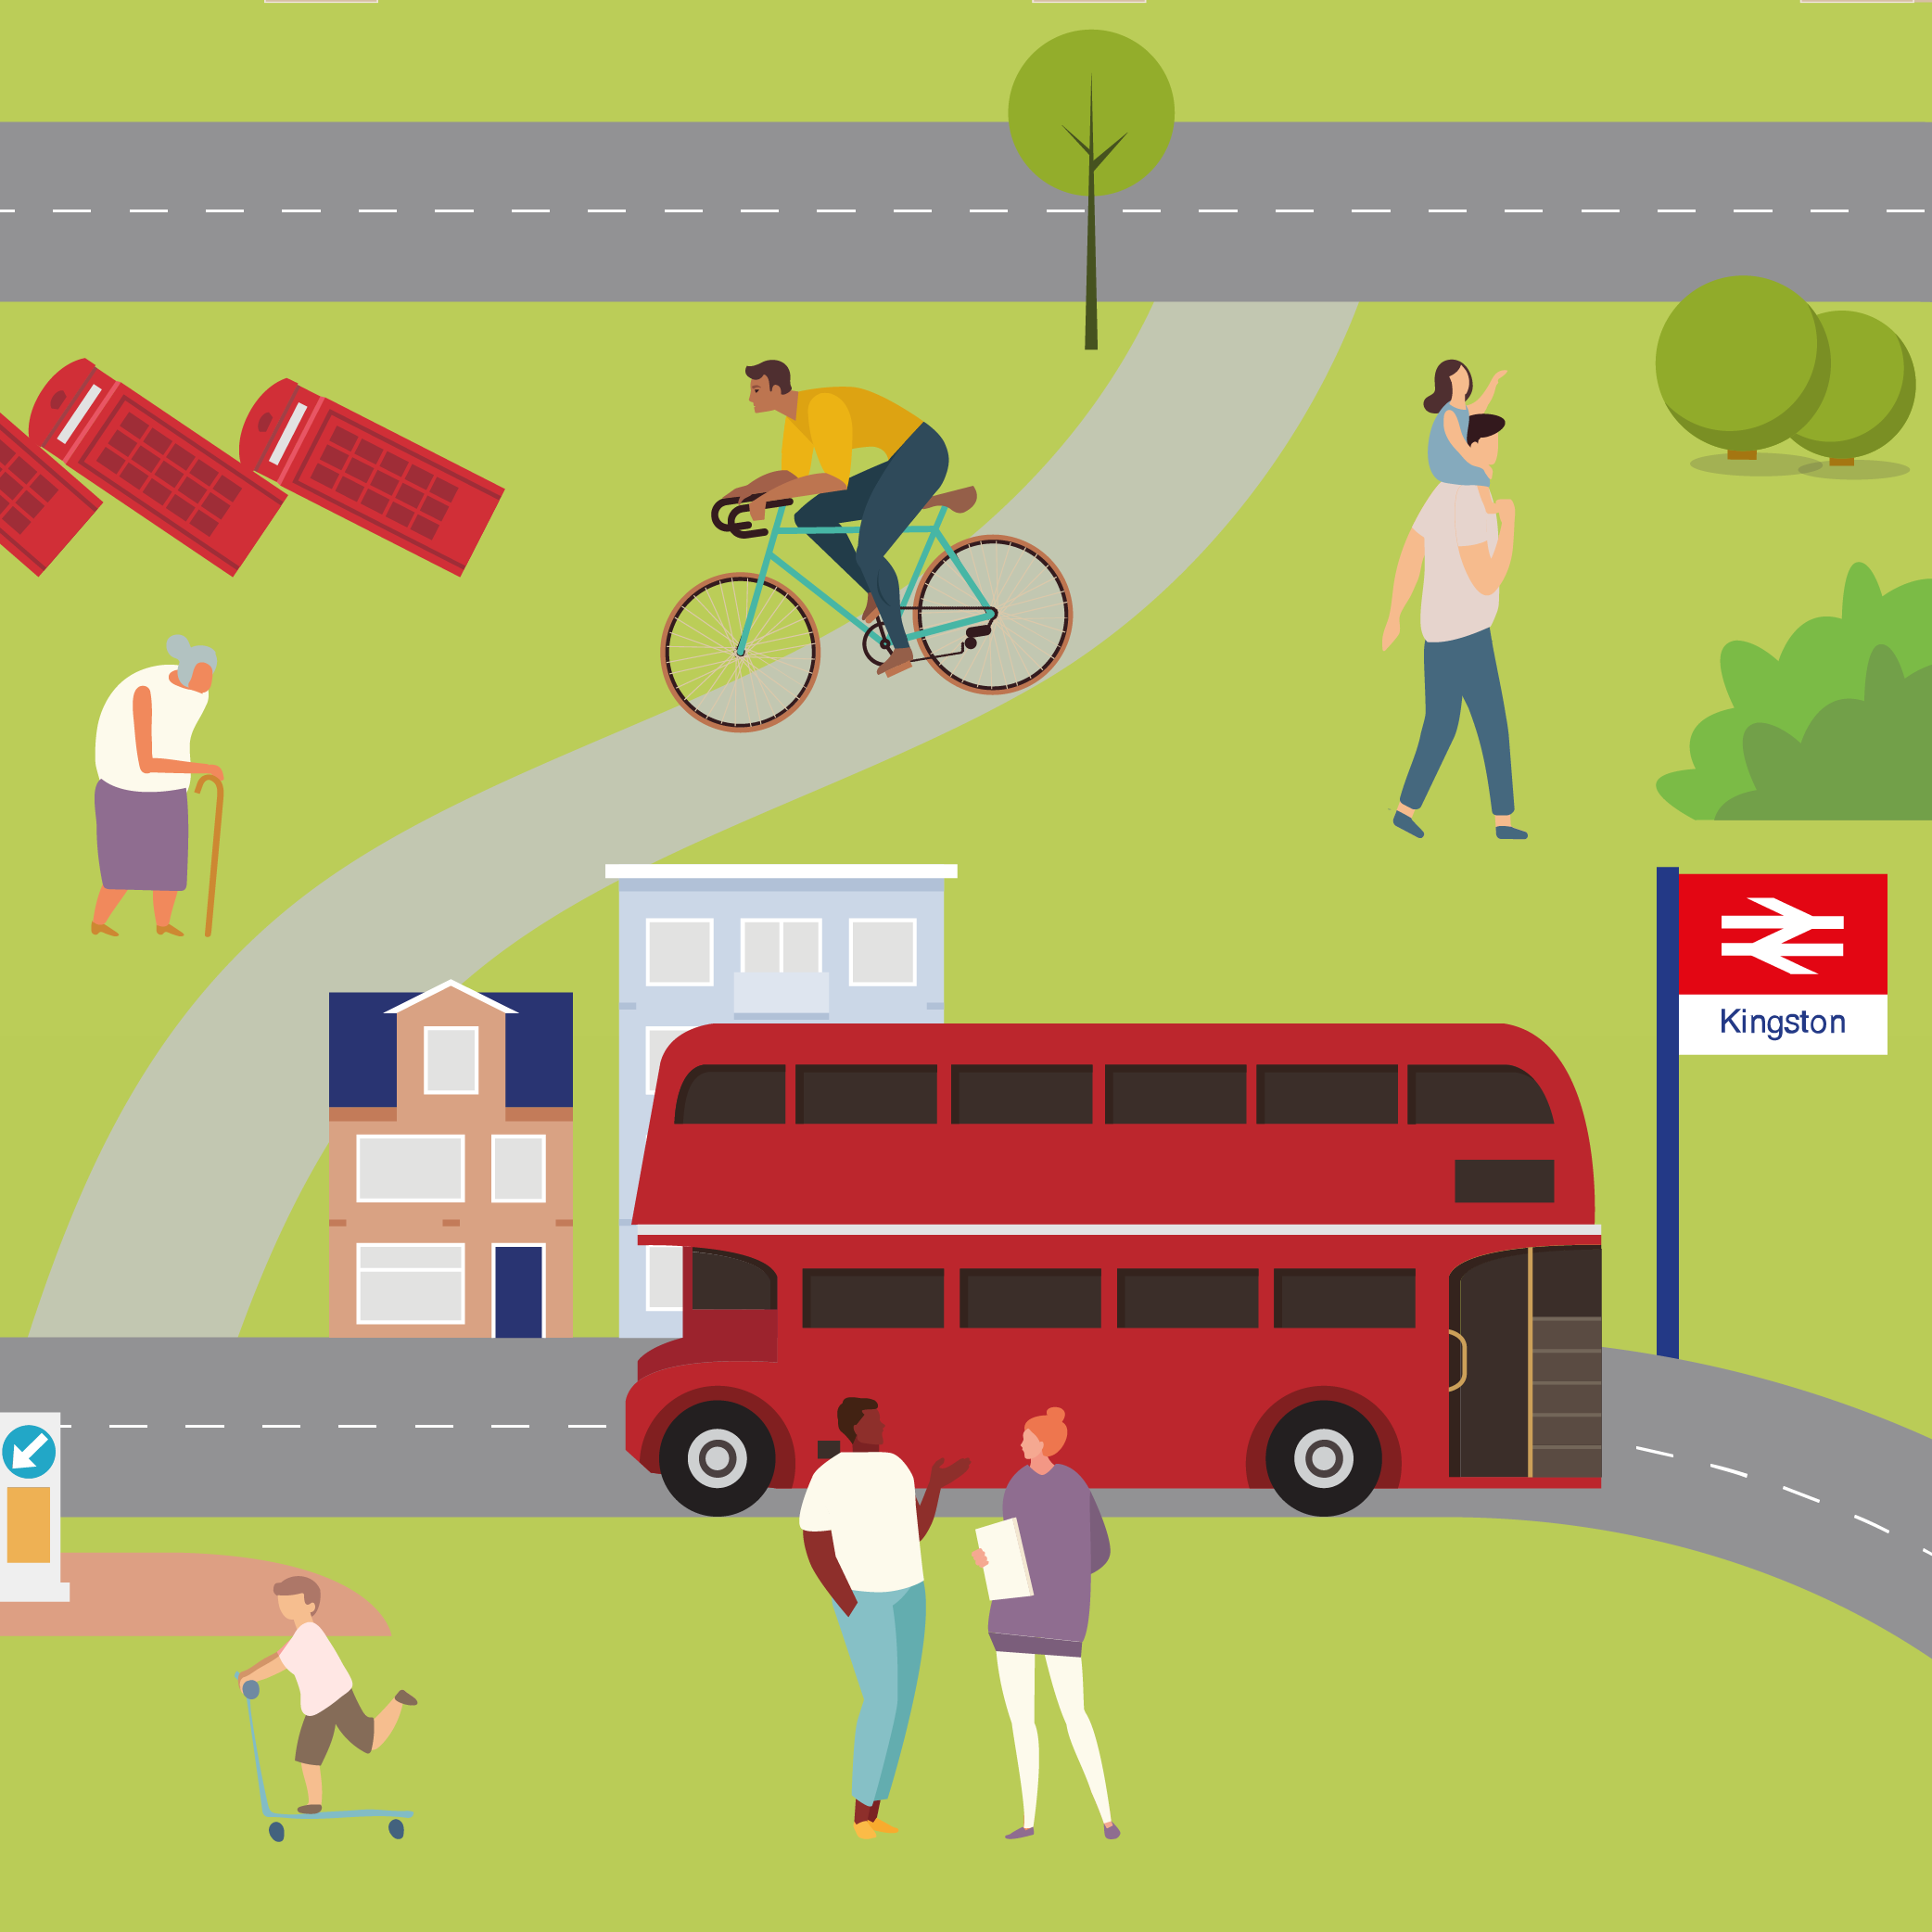 Illustration of street scene feature pedestrians, a cyclist and a double-decker bus